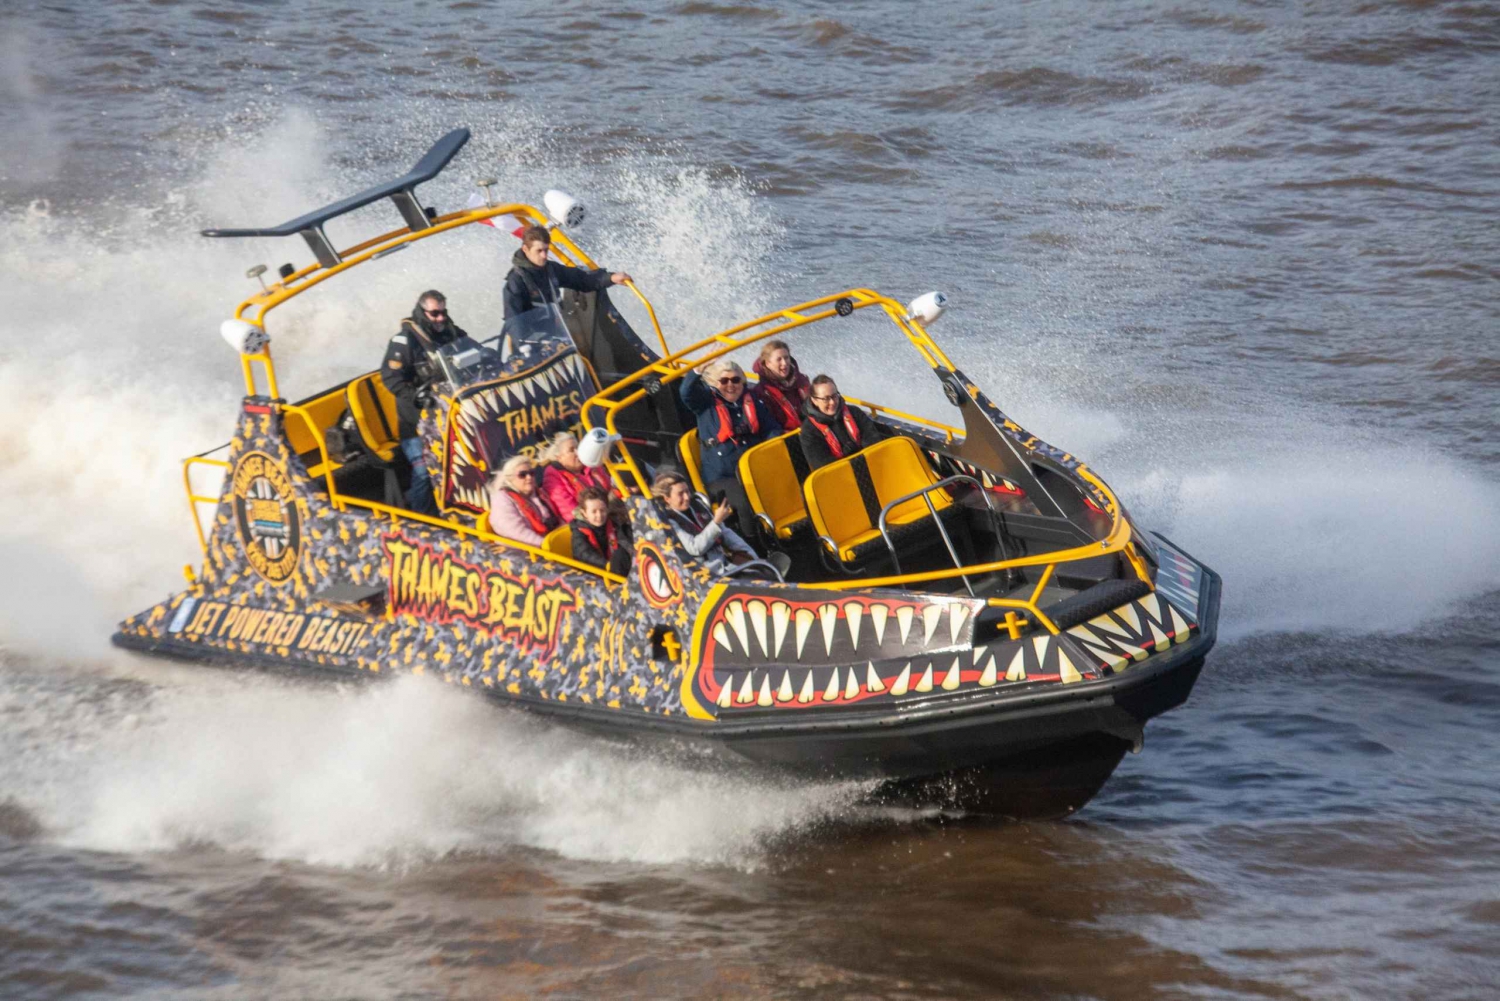 London: 40-minutters TOWER BEAST RIDE - Thames Speedboat Tour